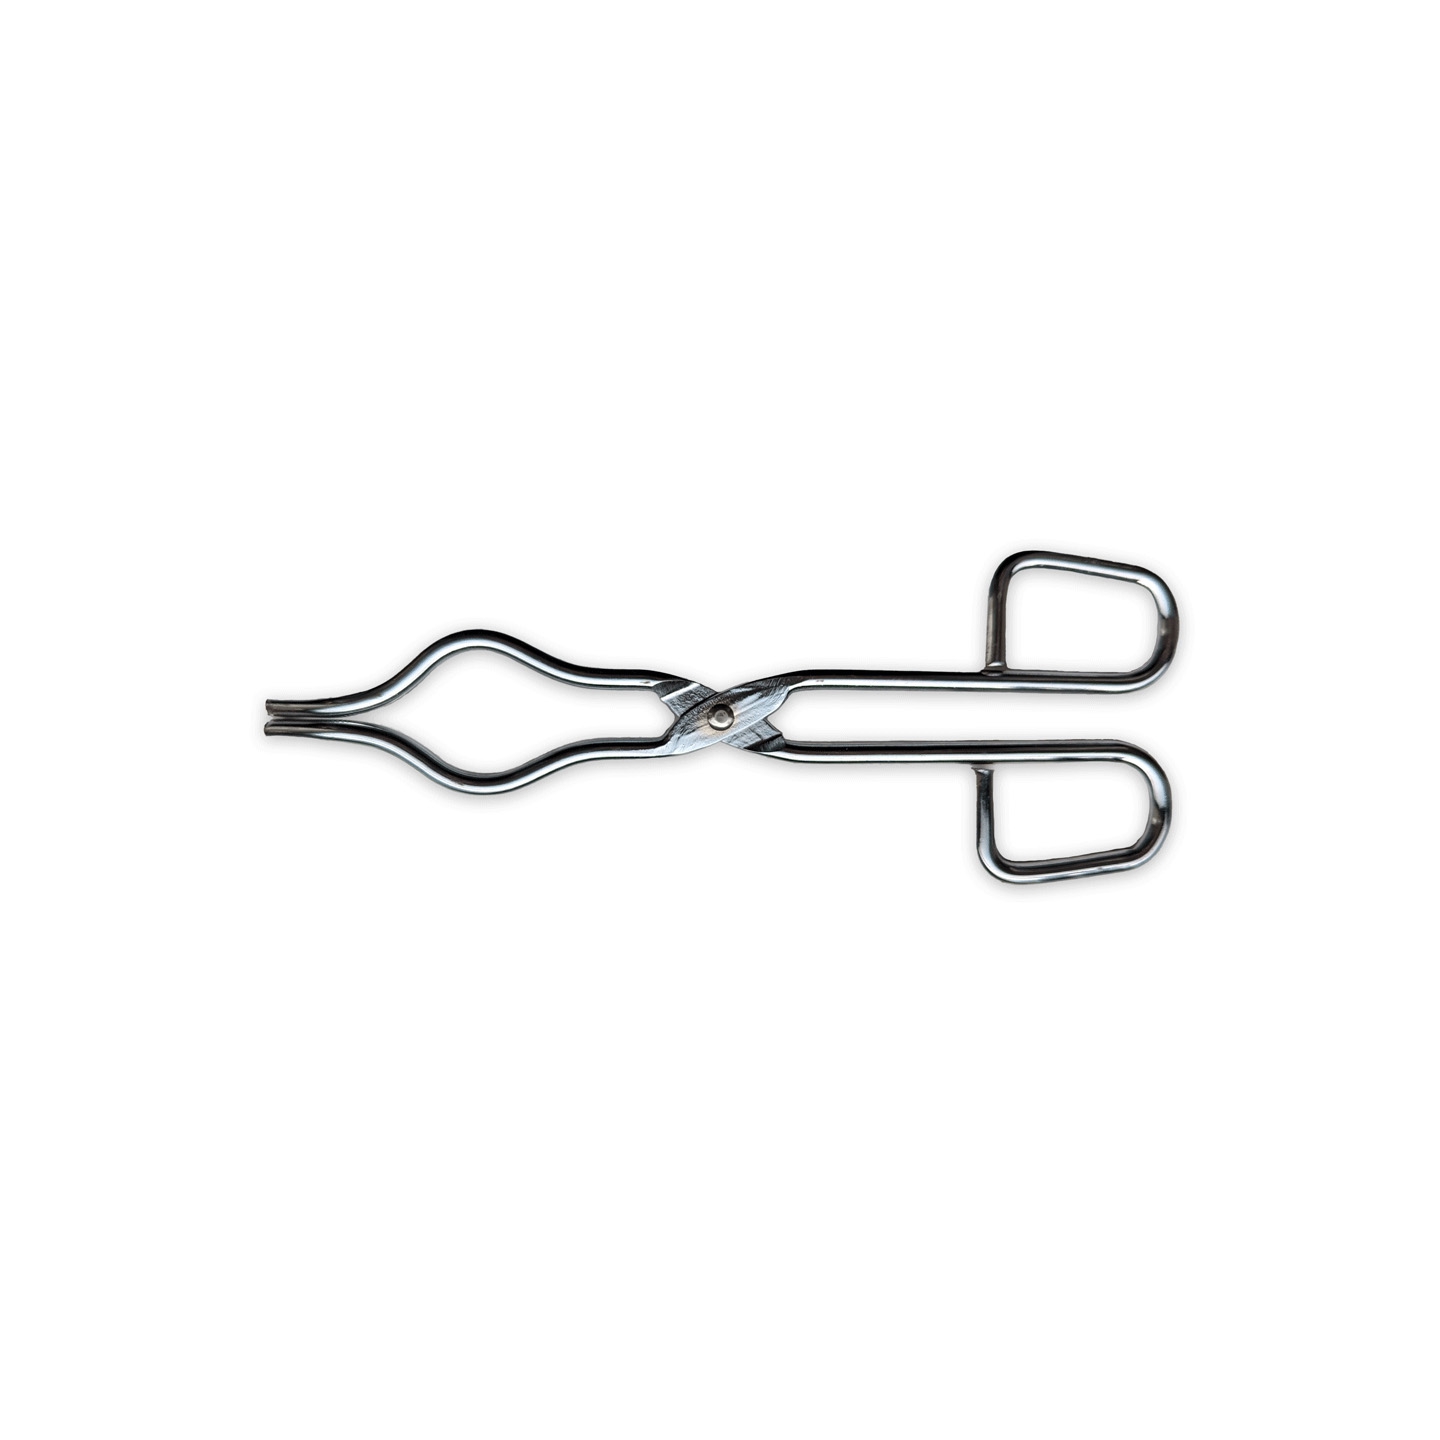 Crucible Tong, Plated Steel, Length 150mm, Straight Tips, Flat Hinge